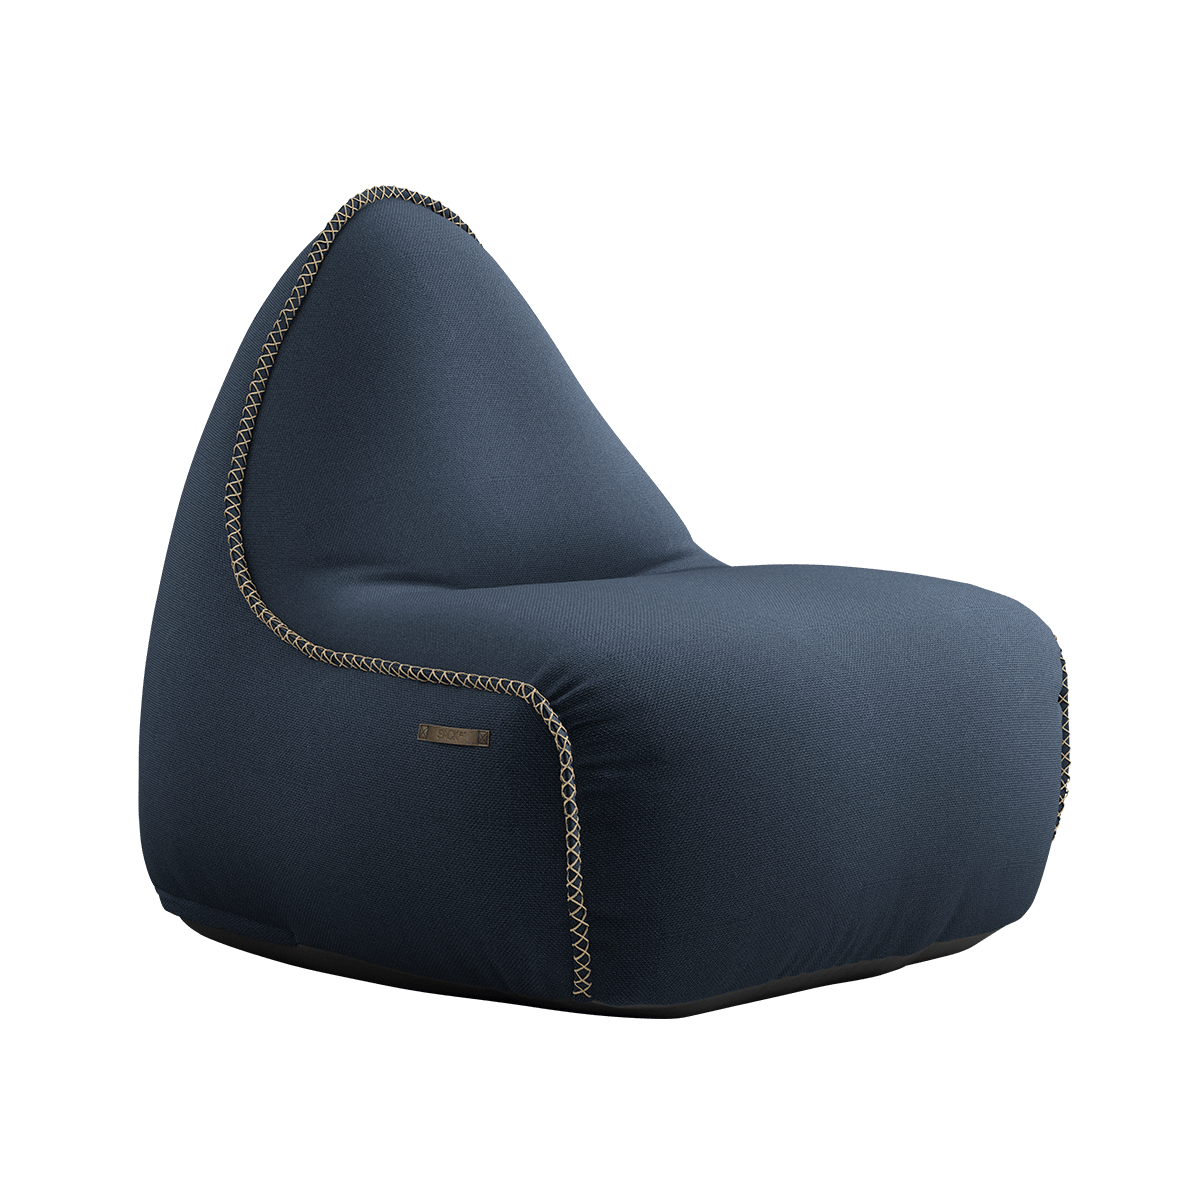 variant_8567101% | Cura Lounge Chair [Contract] - Cura Dark Blue | SACKit